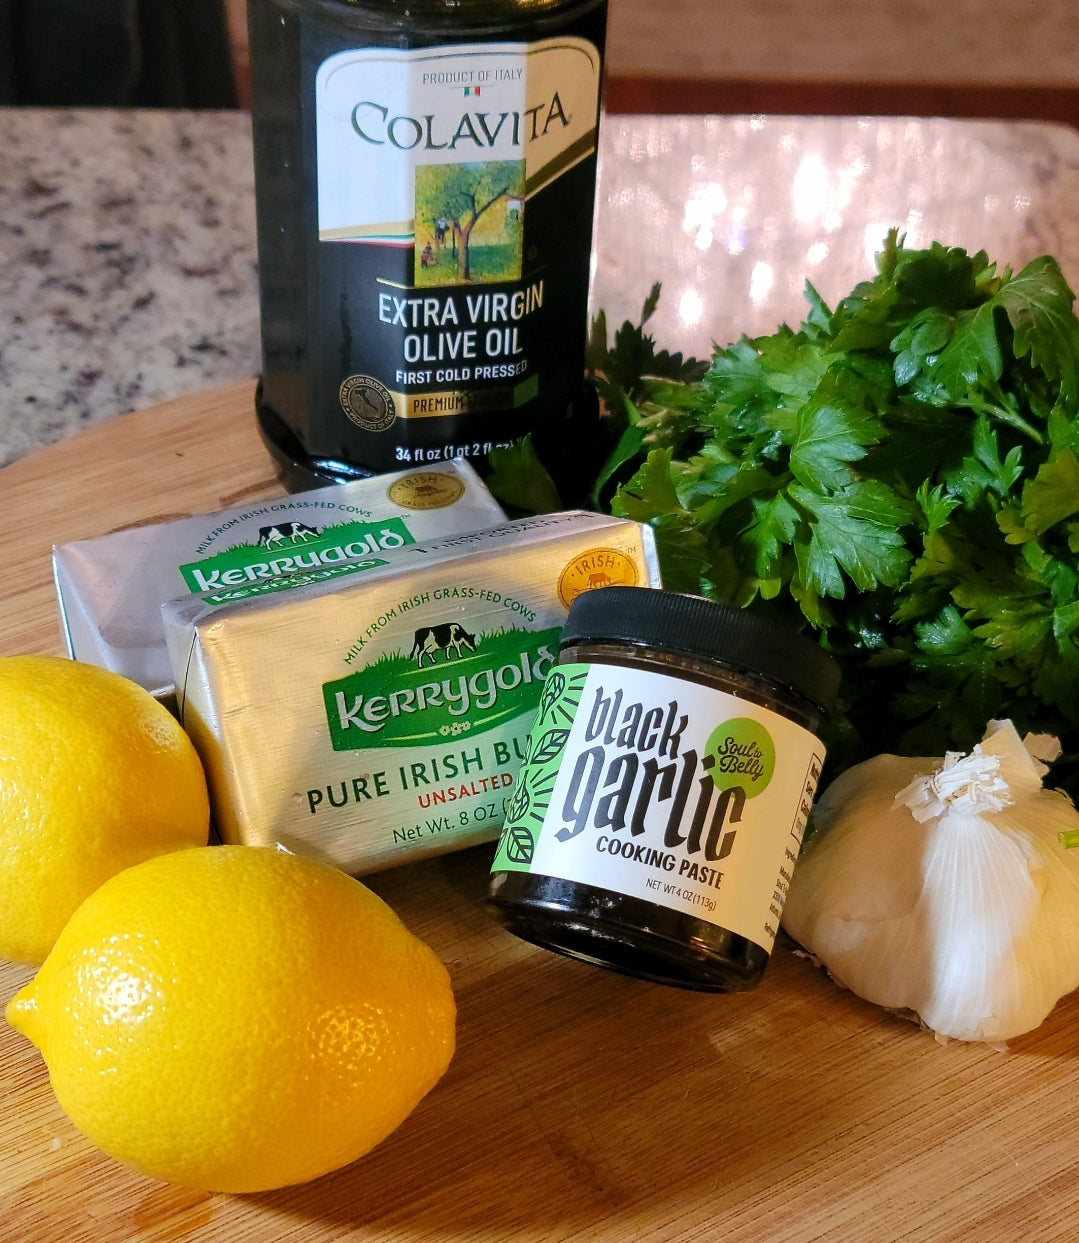 photo of compound Butter ingredients: lemons, kerrygold irish butter, soul to belly black garlic cooking paste, fresh parsley, and extra virgin olive oil